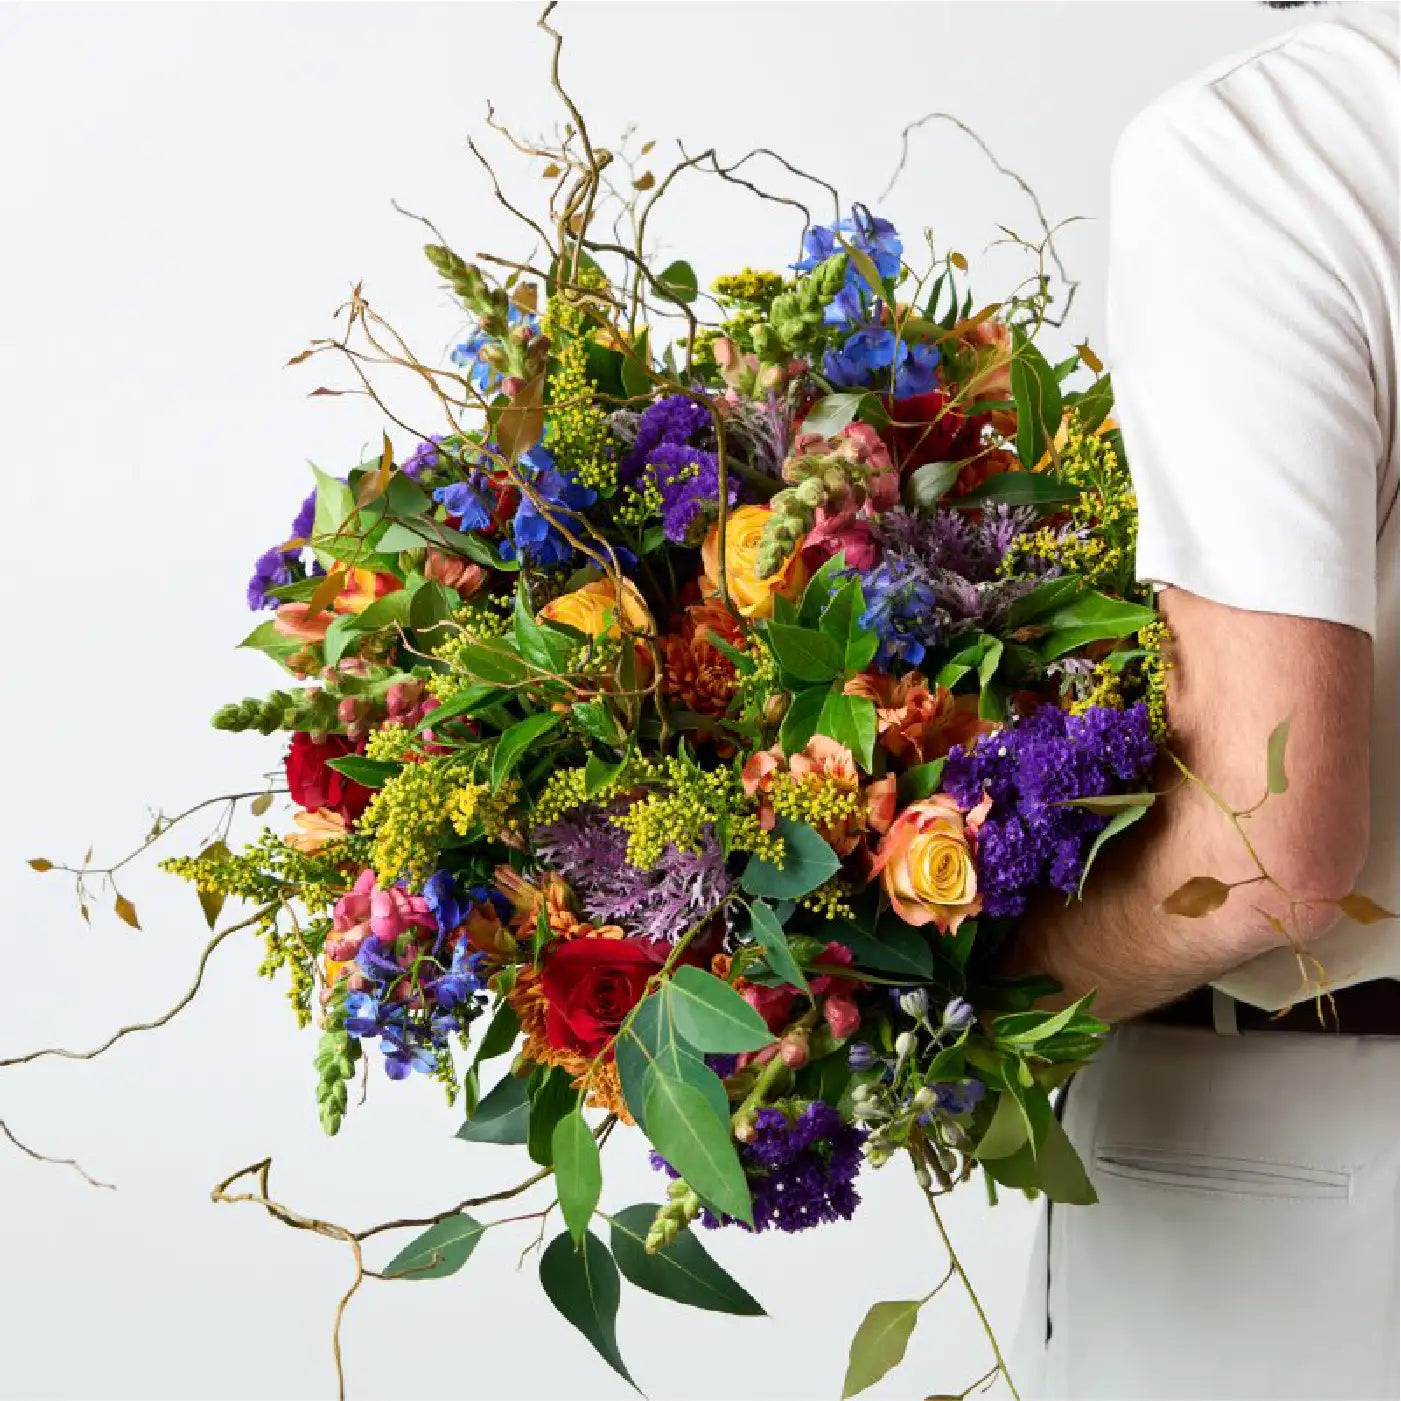 Person holding a large, vibrant bouquet of mixed flowers including roses, delphiniums, and greenery against a white background. Business Gifting. Fabulous Flowers and Gifts.